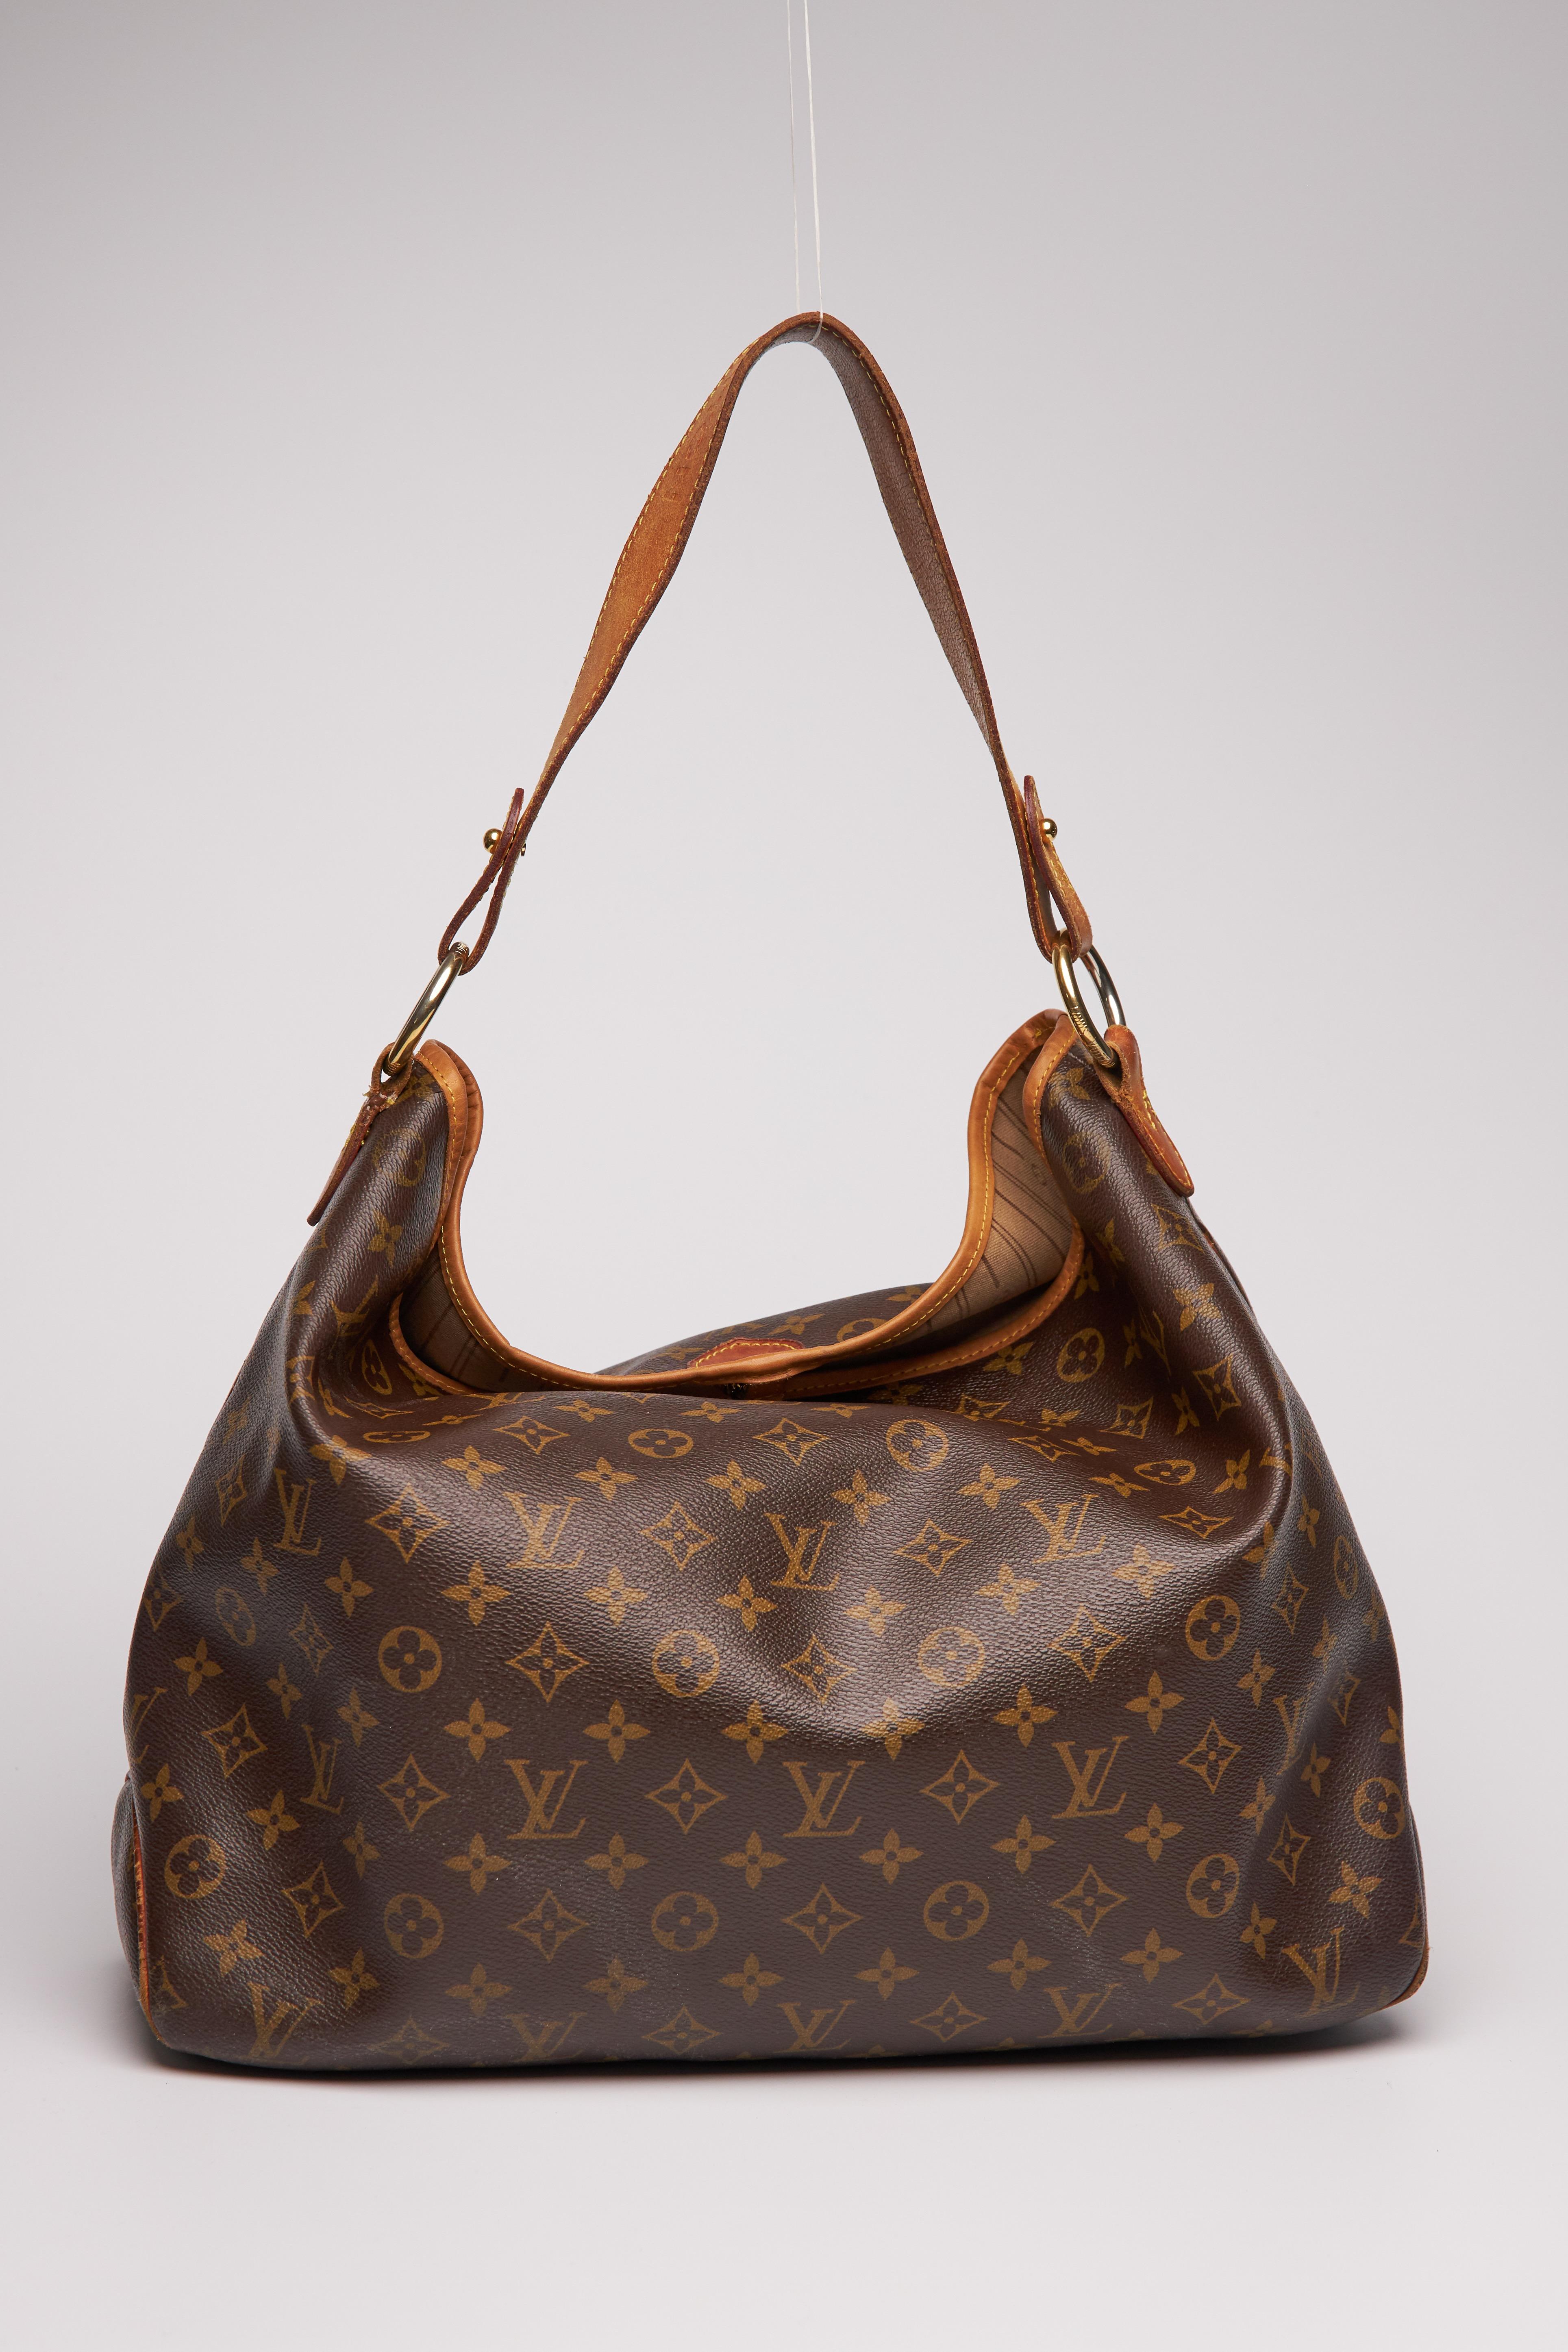 
This tote bag is made of signature Louis Vuitton monogram on coated canvas. The bag features vachetta cowhide leather trim, a matching thick looping shoulder with polished brass hardware, an open top and striped beige fabric interior with a zipper